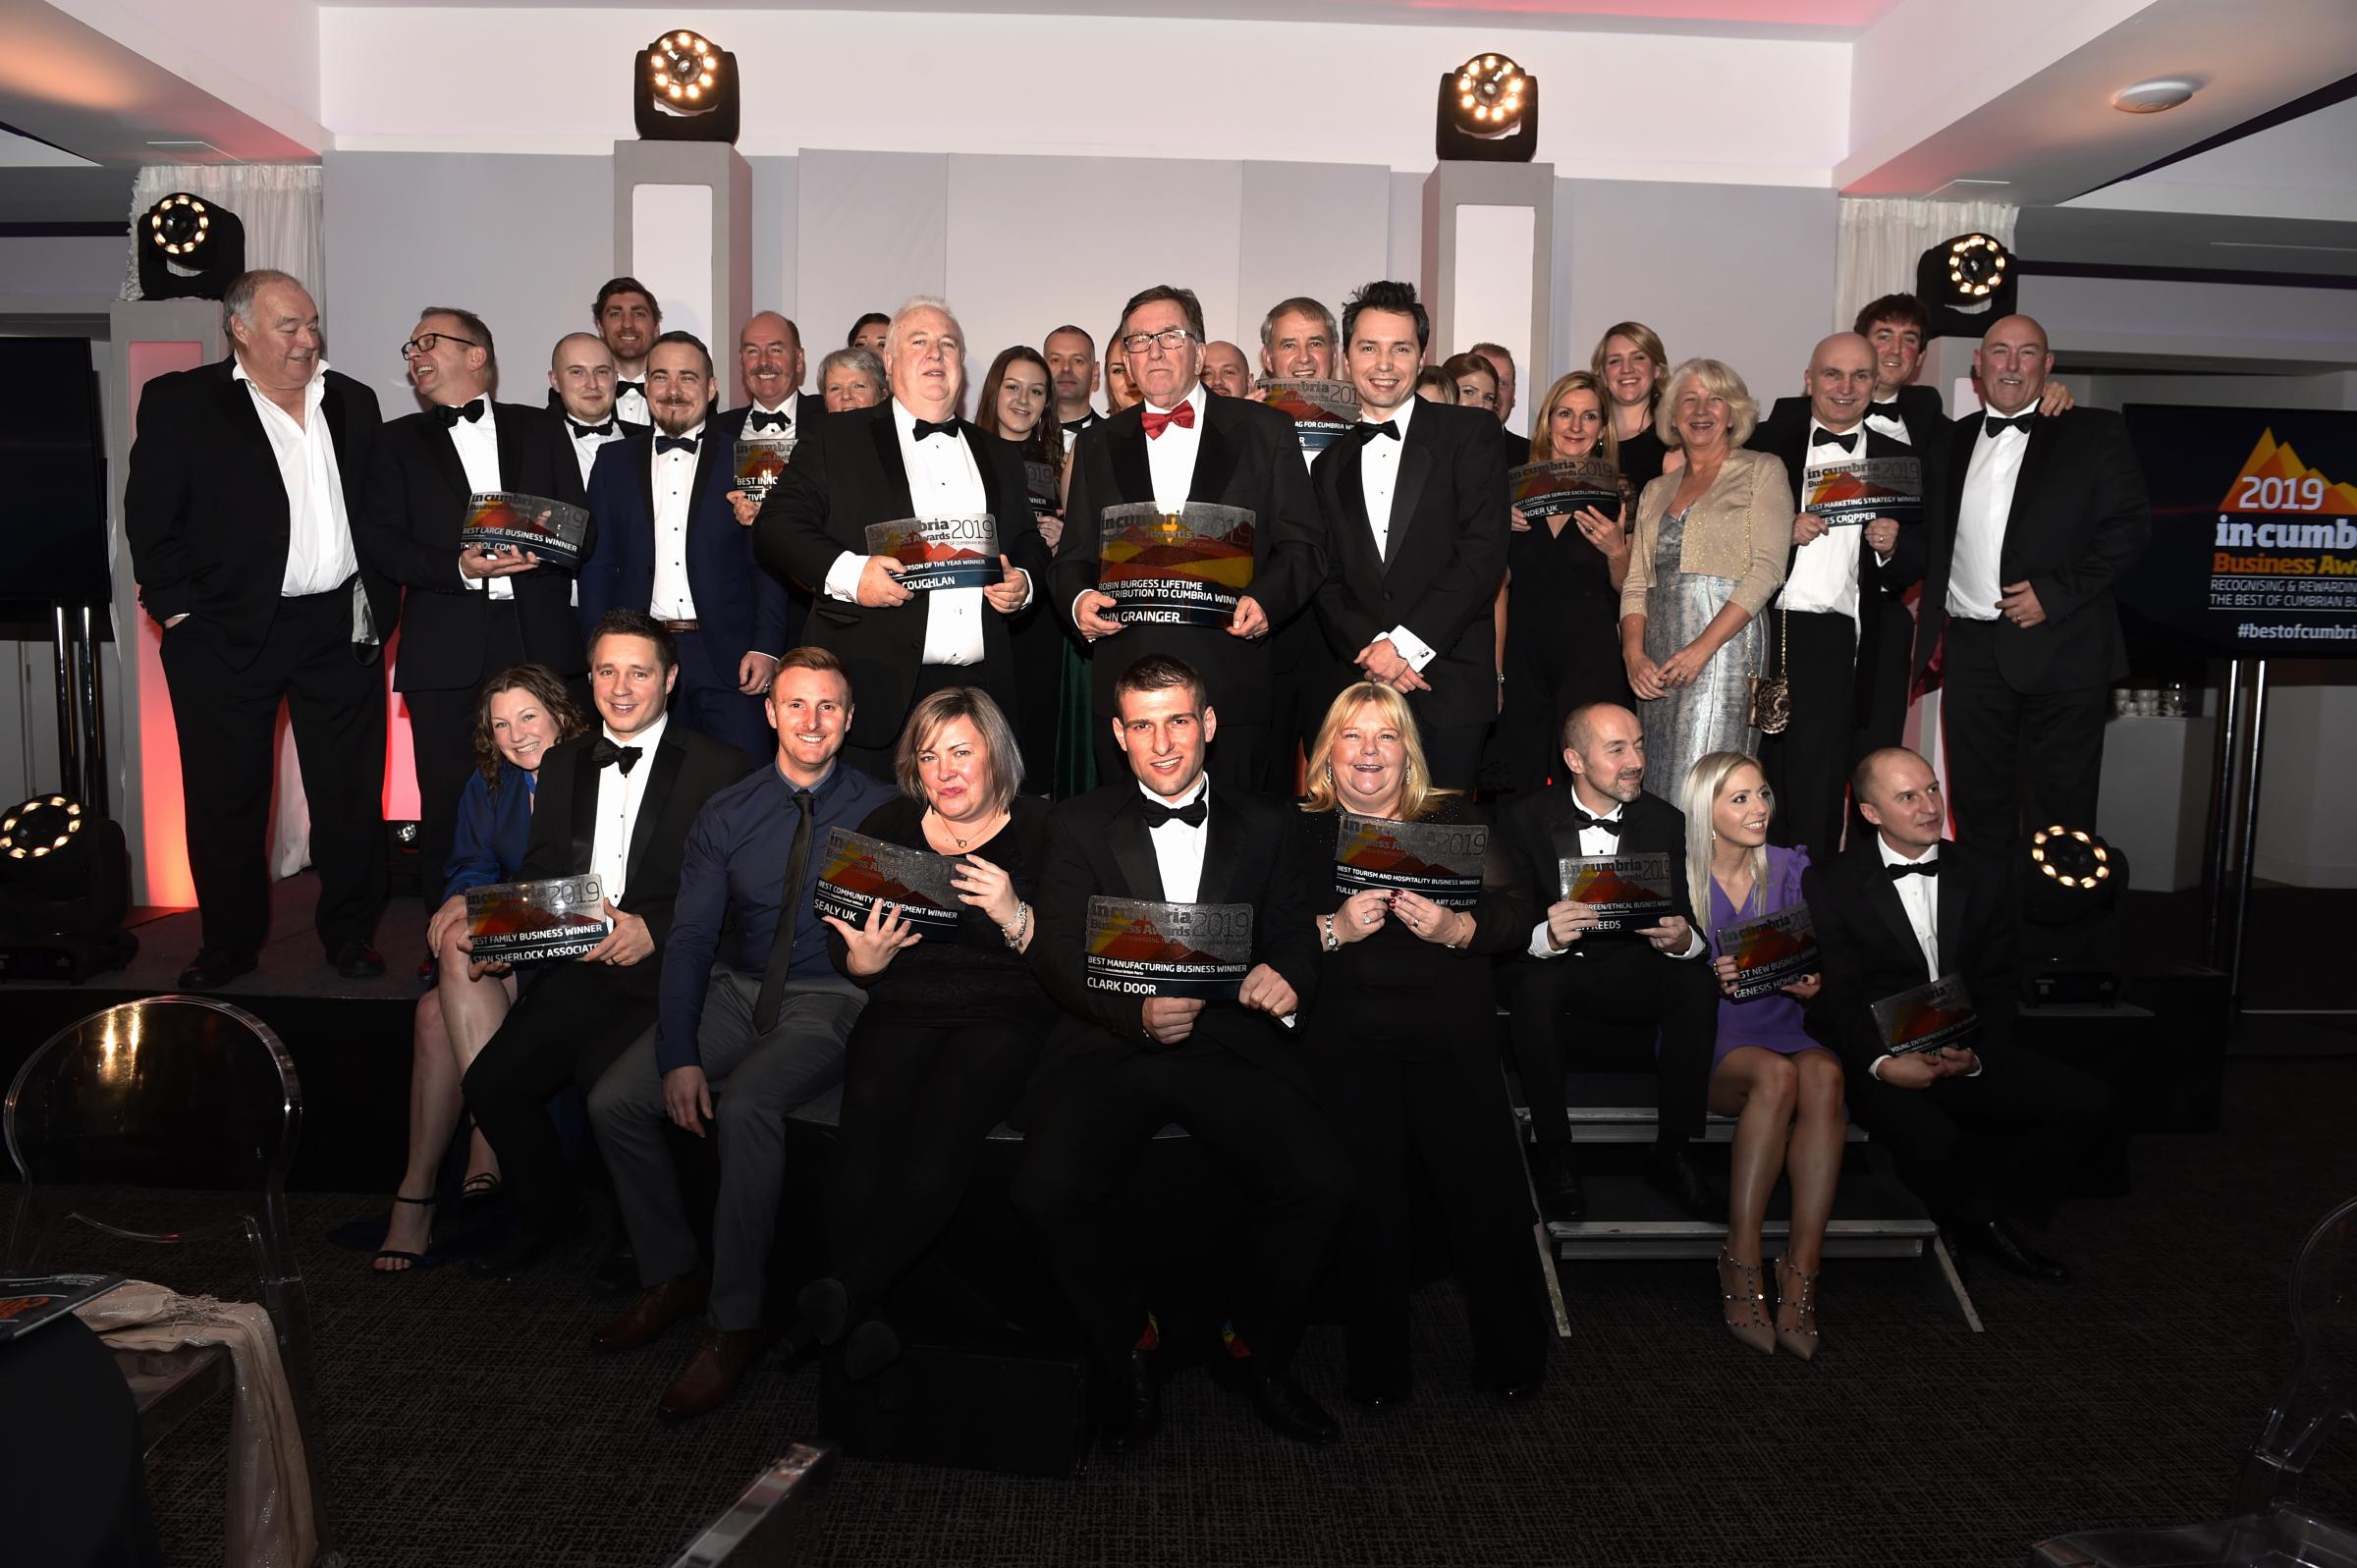 The in-cumbria Business Awards 2019, at The Halston, Carlisle, 14 November 2019...All the award winners on stage LOUISE PORTER.